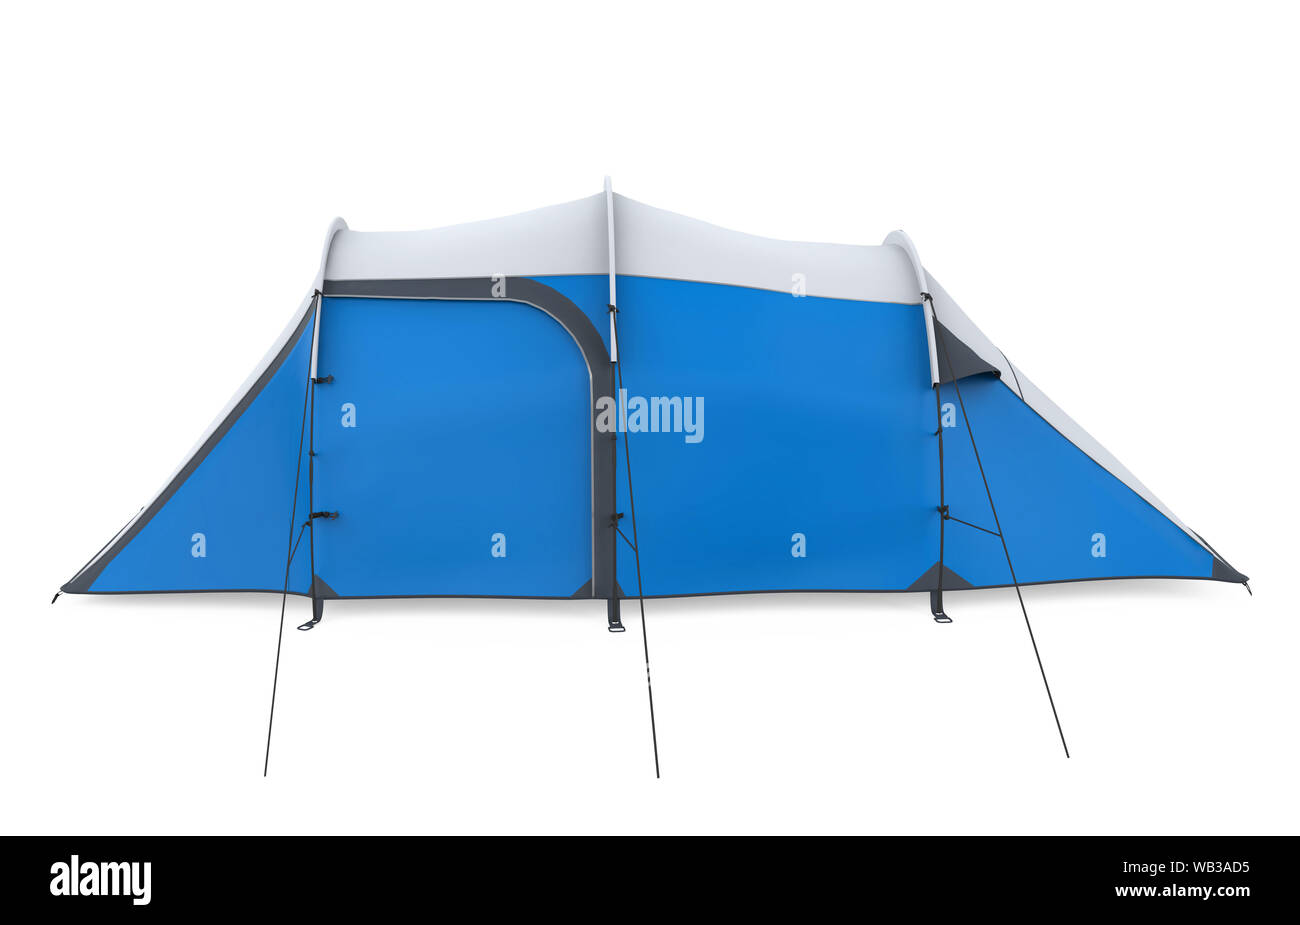 Camping expedition equipment Cut Out Stock Images & Pictures - Page 2 -  Alamy